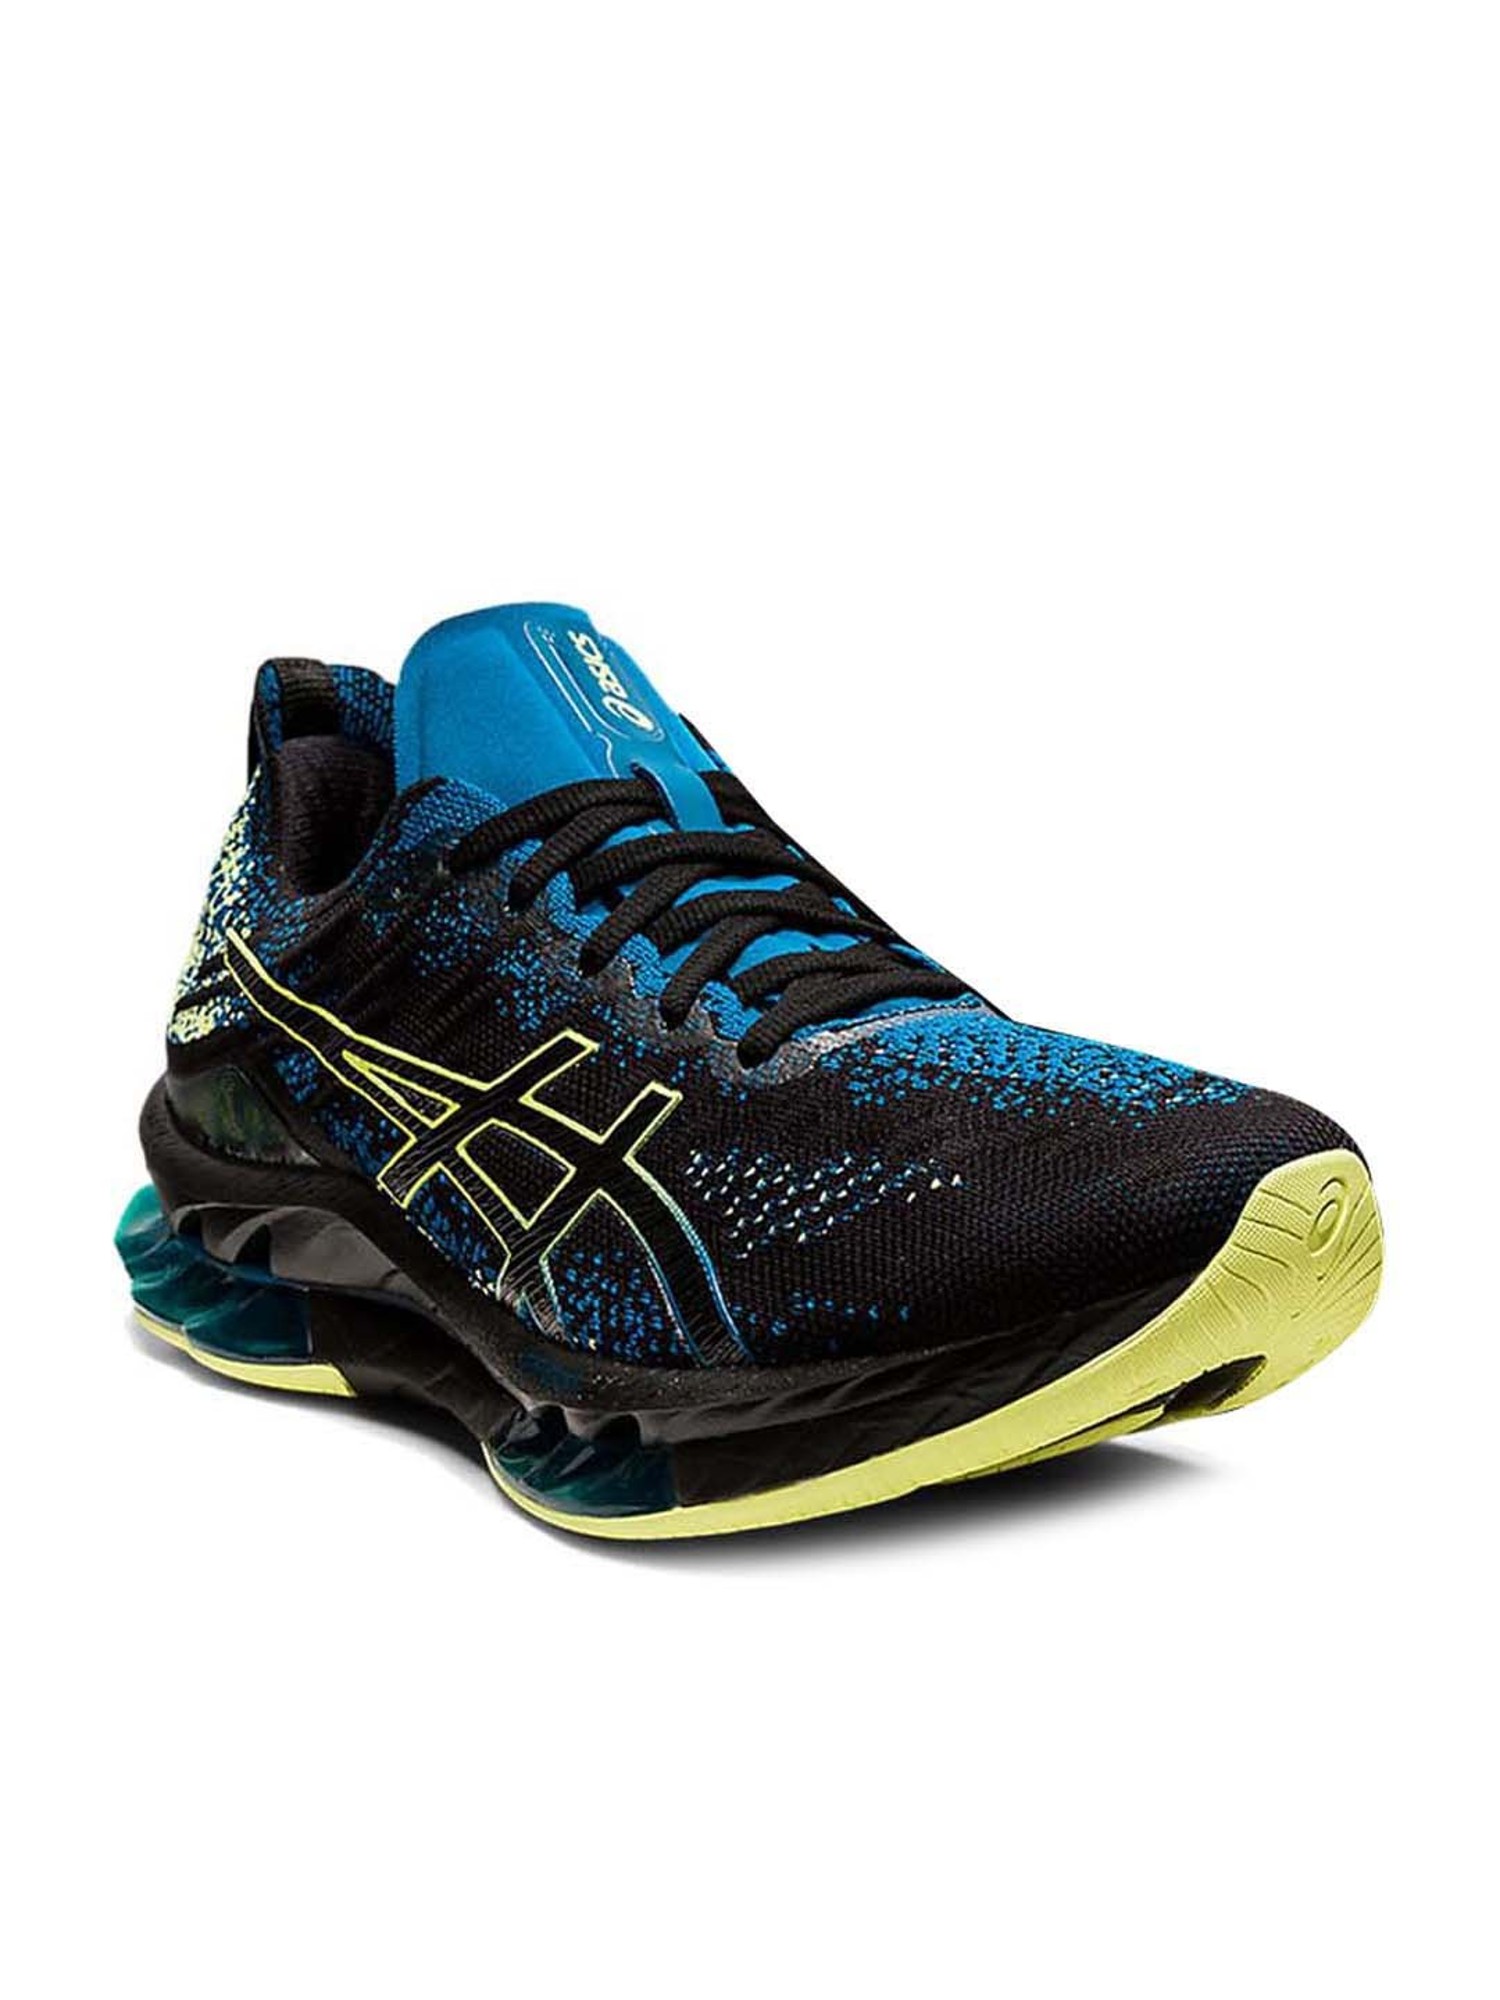 for Men Save 40% Mens Trainers Asics Trainers Asics ® Gel-kinsei Blast Running Shoes in White Black Black 